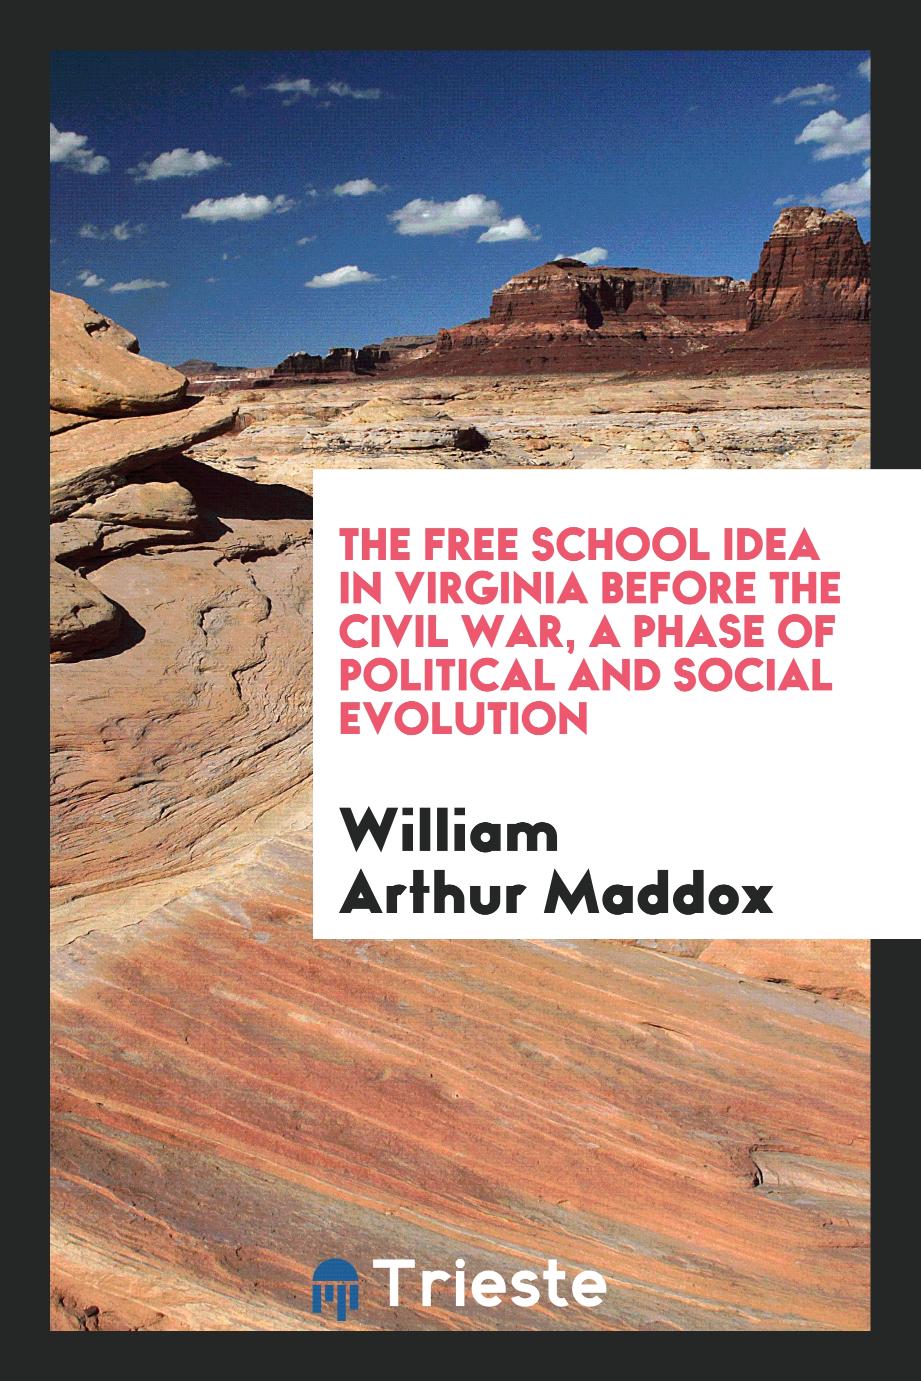 The free school idea in Virginia before the Civil War, a phase of political and social evolution